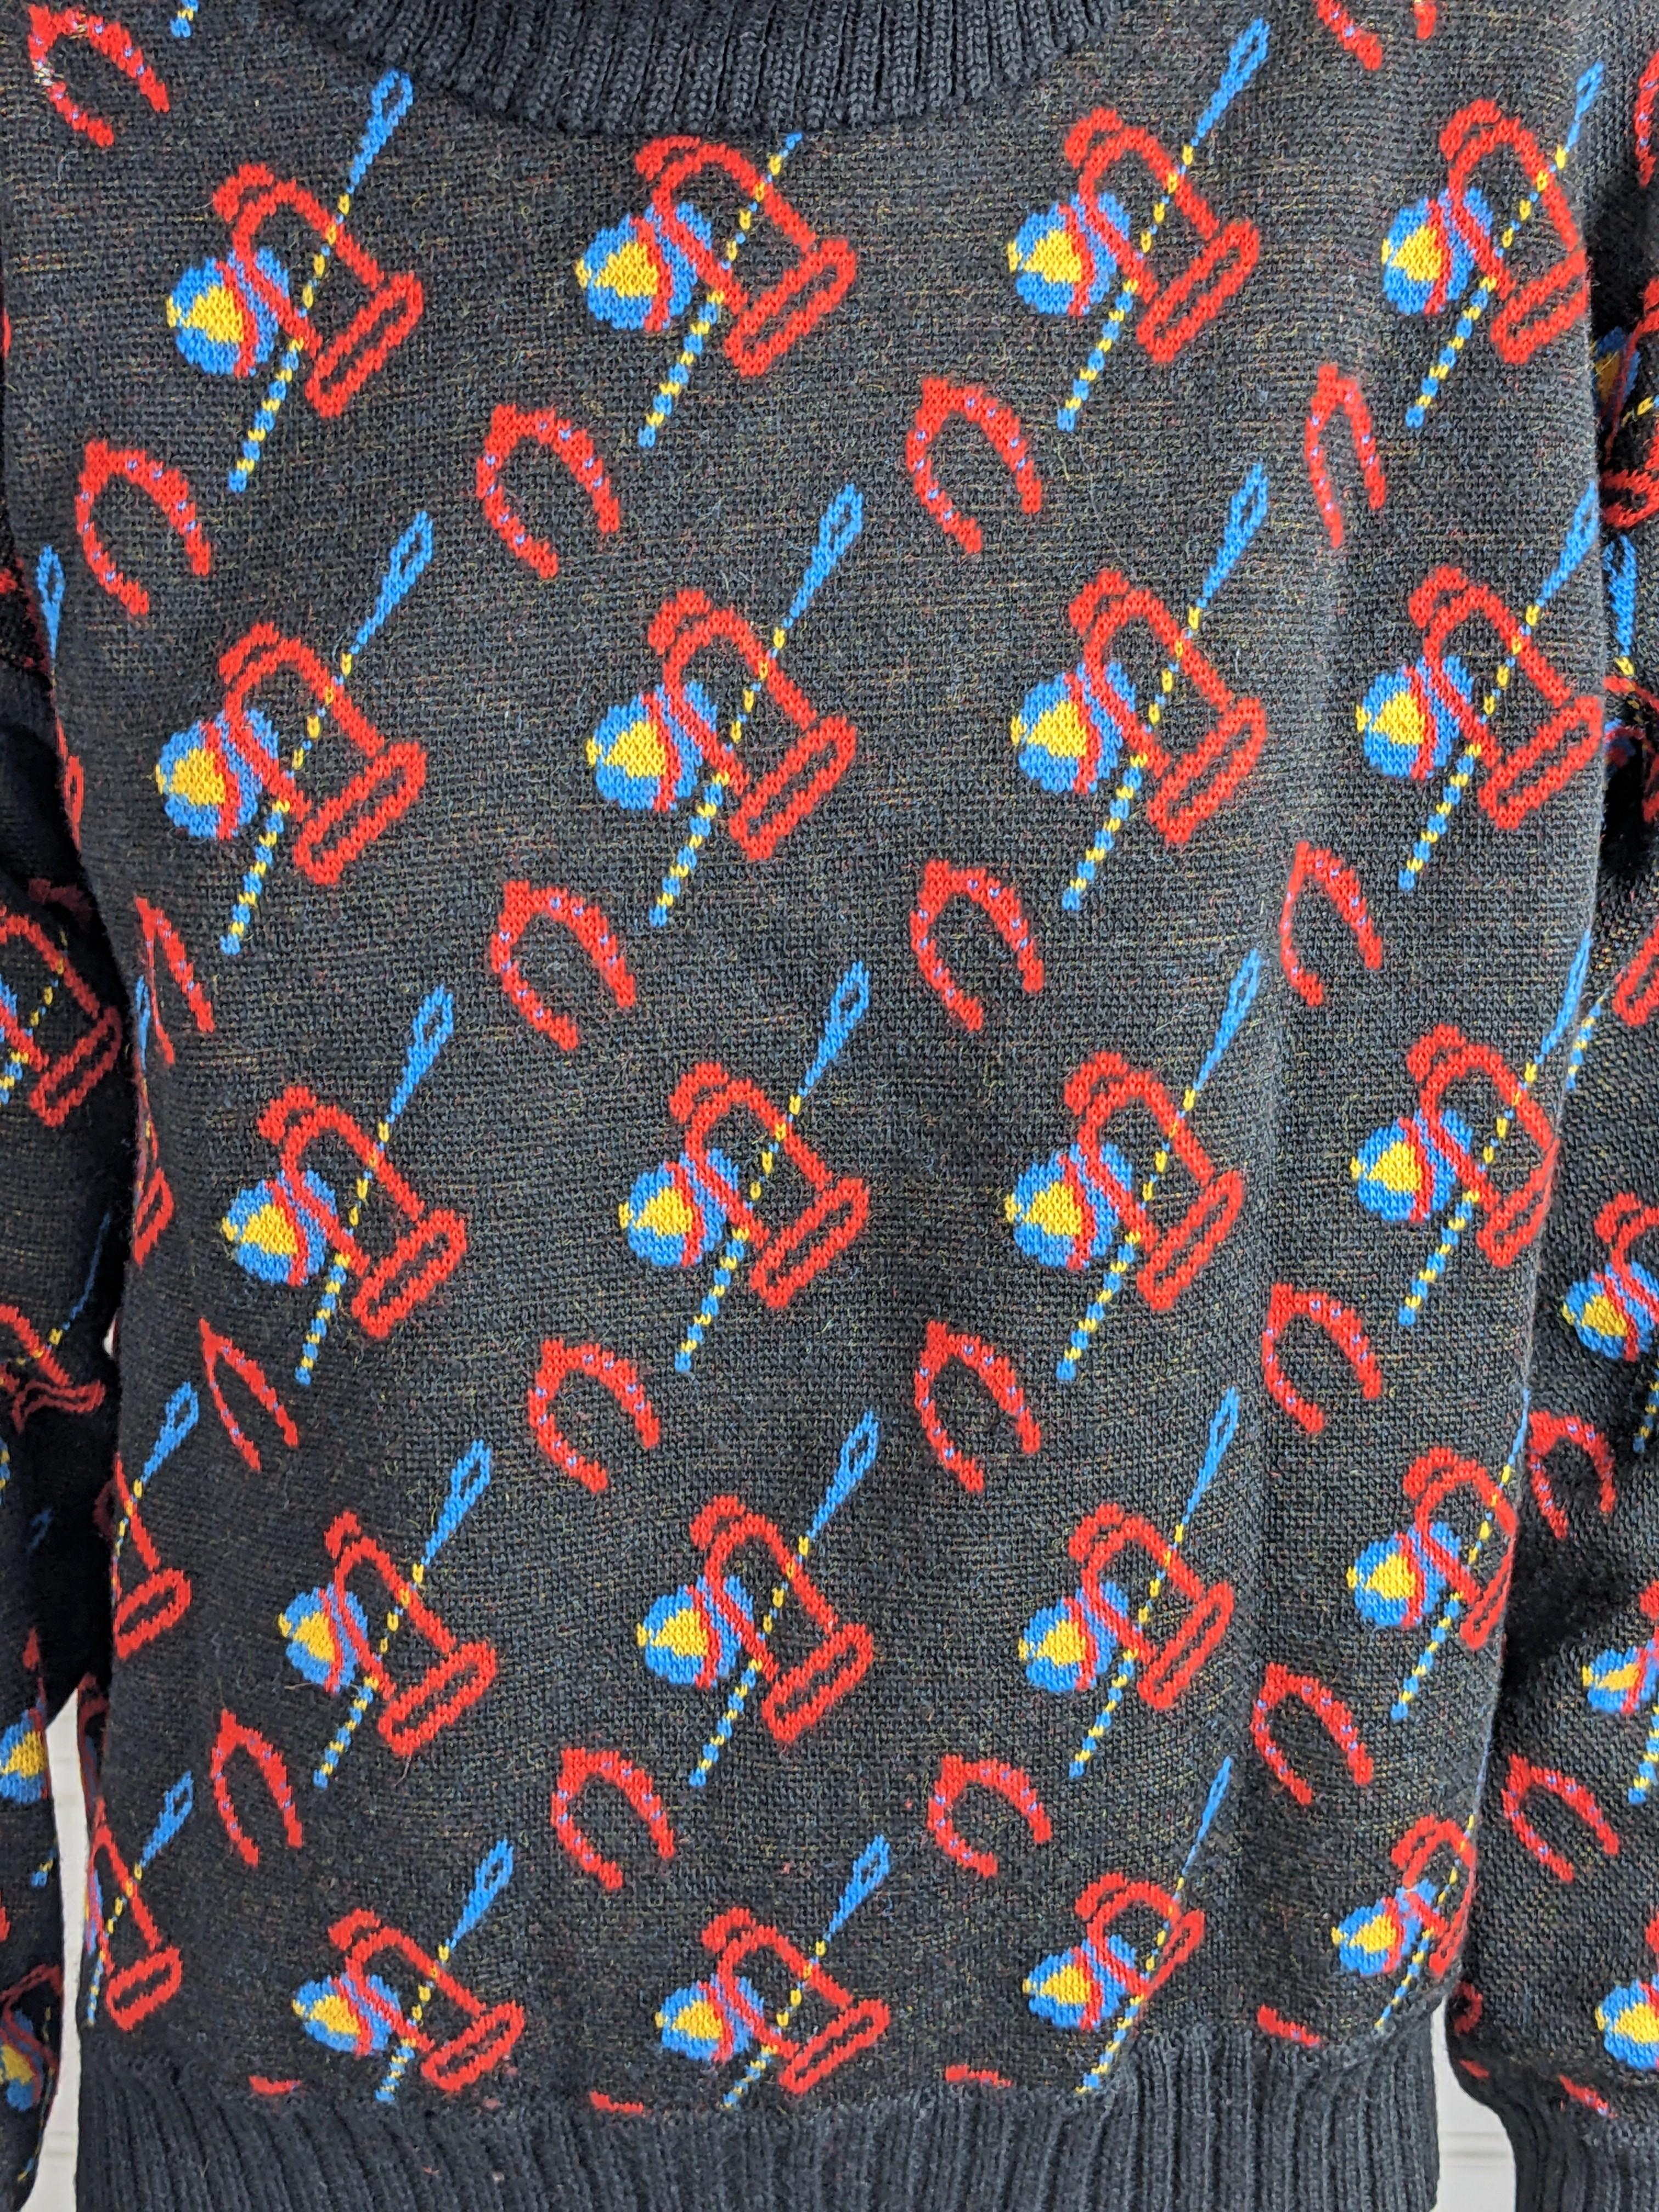 Gucci Colorful Riding Motif Sweater In Good Condition For Sale In New York, NY